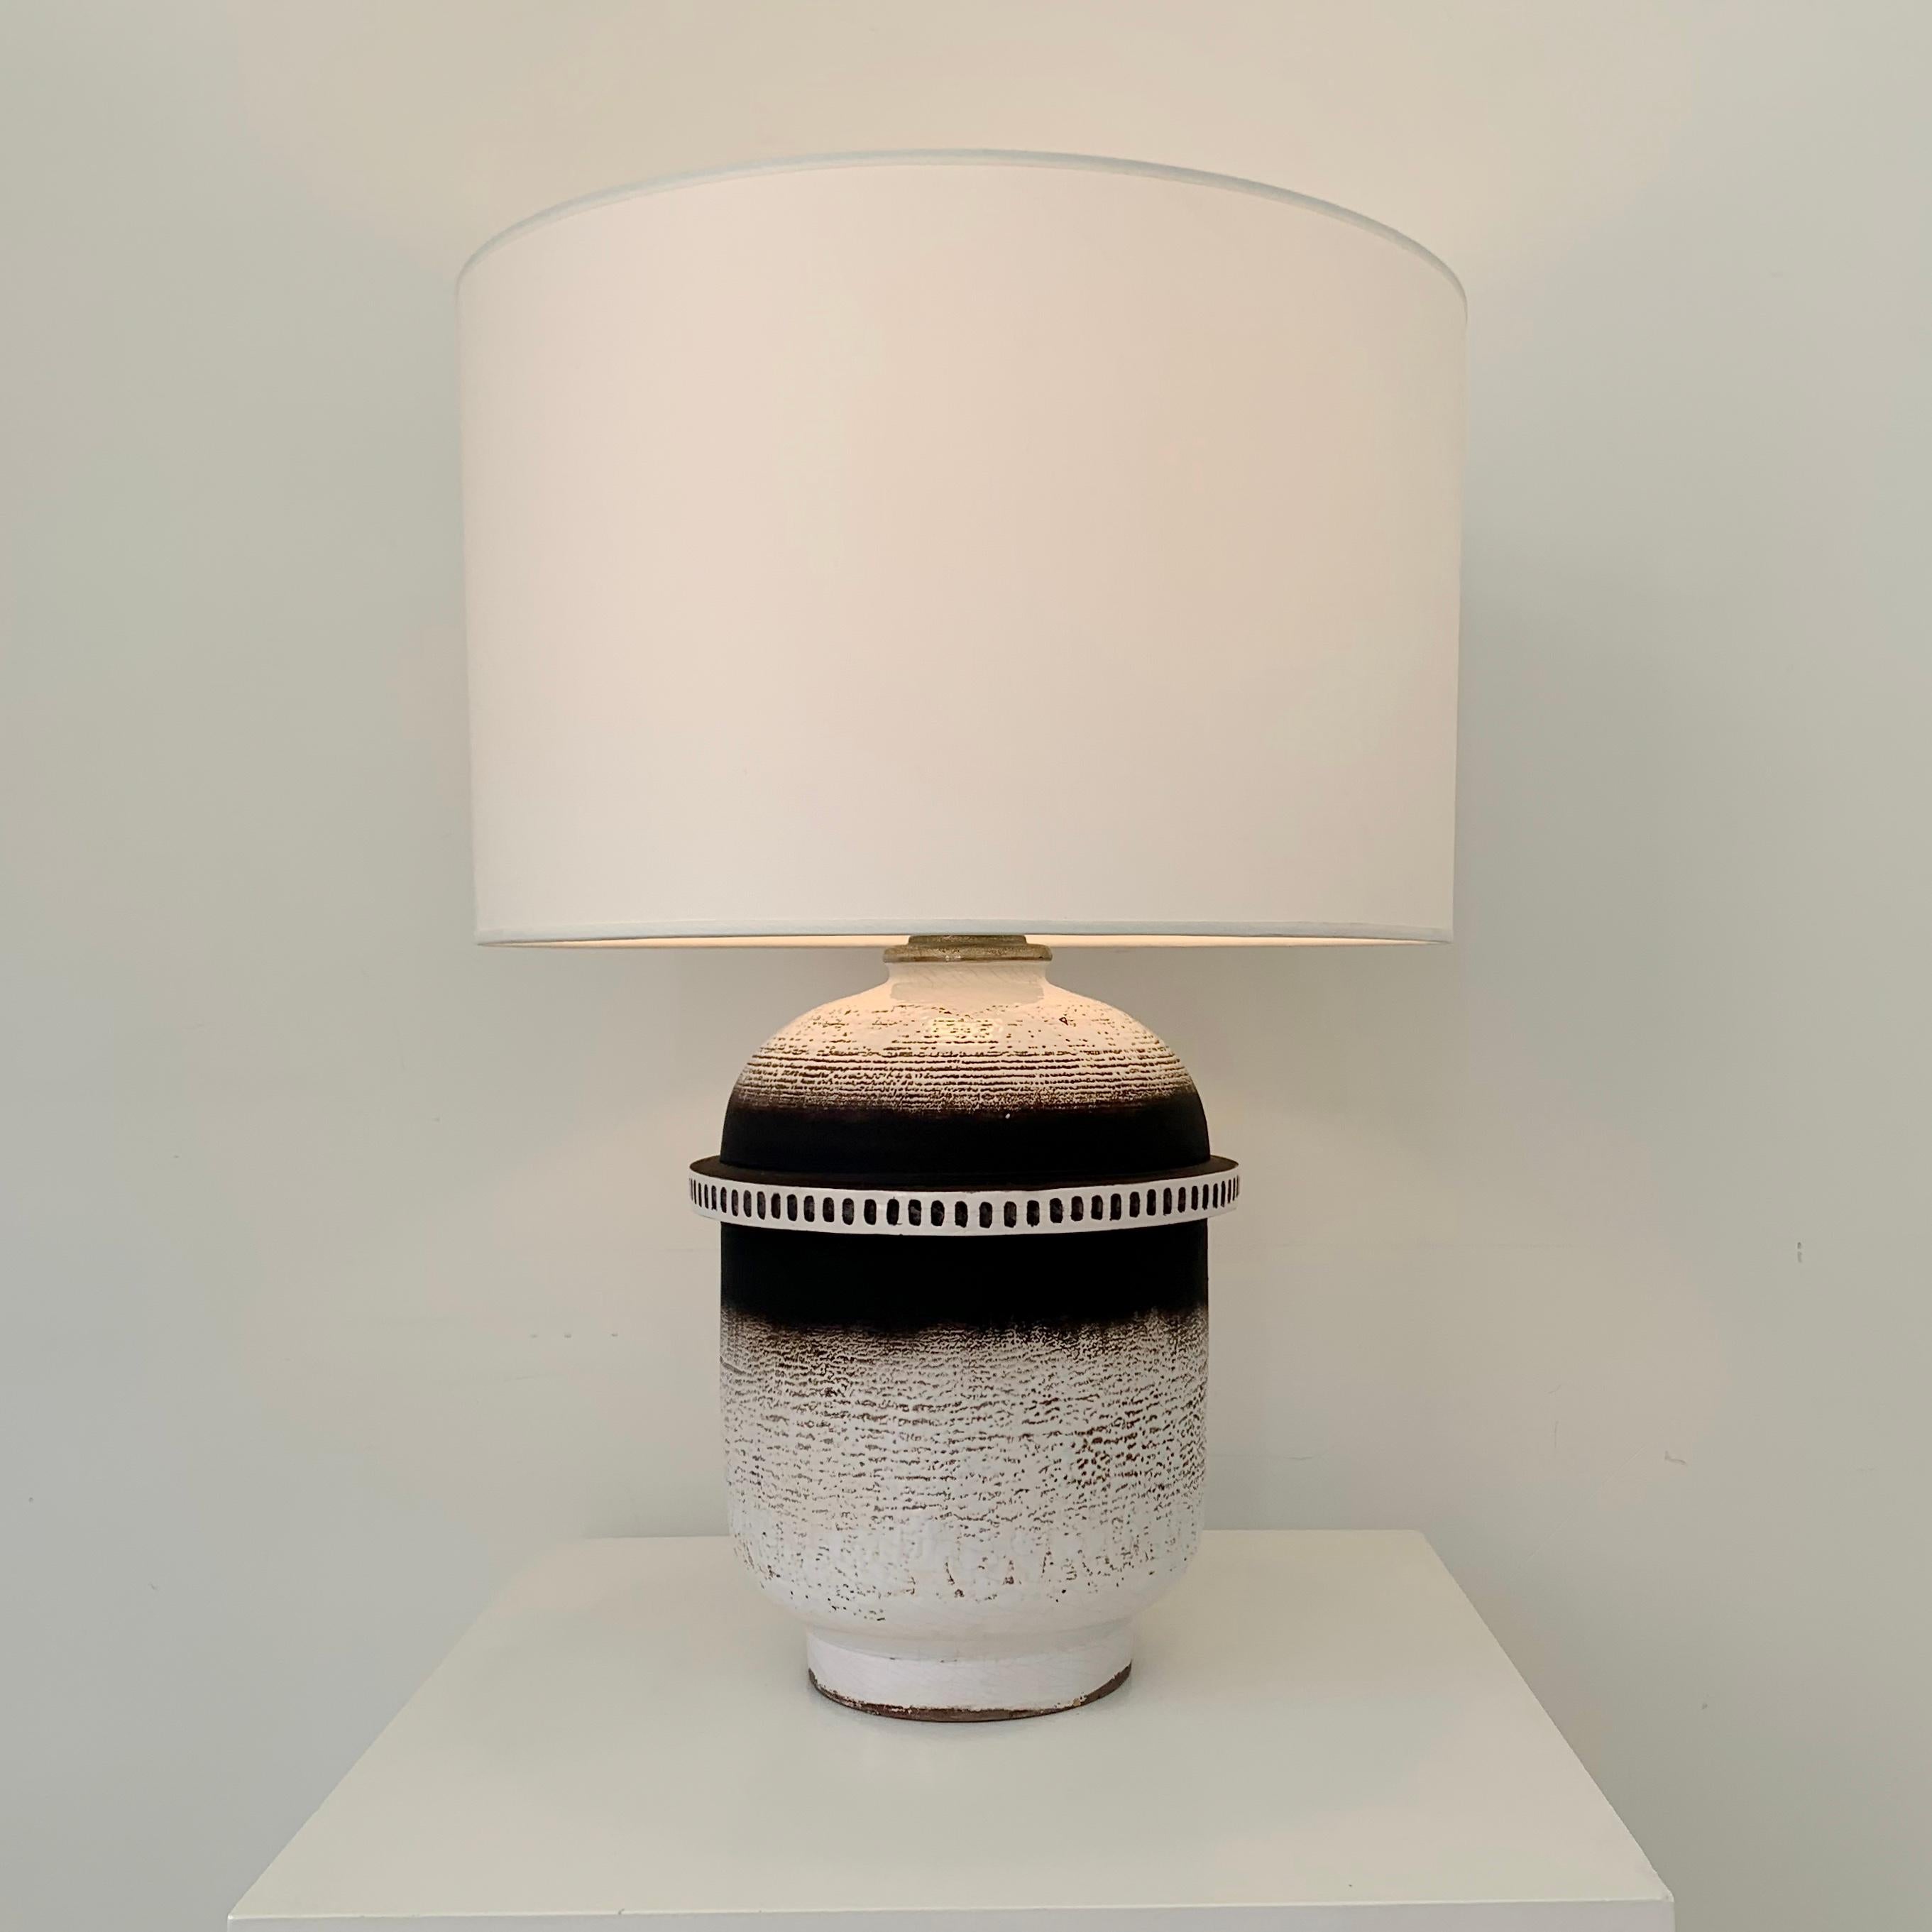 Large Keramos Art Deco table lamp, circa 1930, France.
Signed Keramos 
Enameled ceramic with brown and white abstract decor.
Very decorative table lamp.
New white fabric shade, 
Rewired, for EU or USA use, one E27 bulb of 40 W.
Dimensions: 56 cm